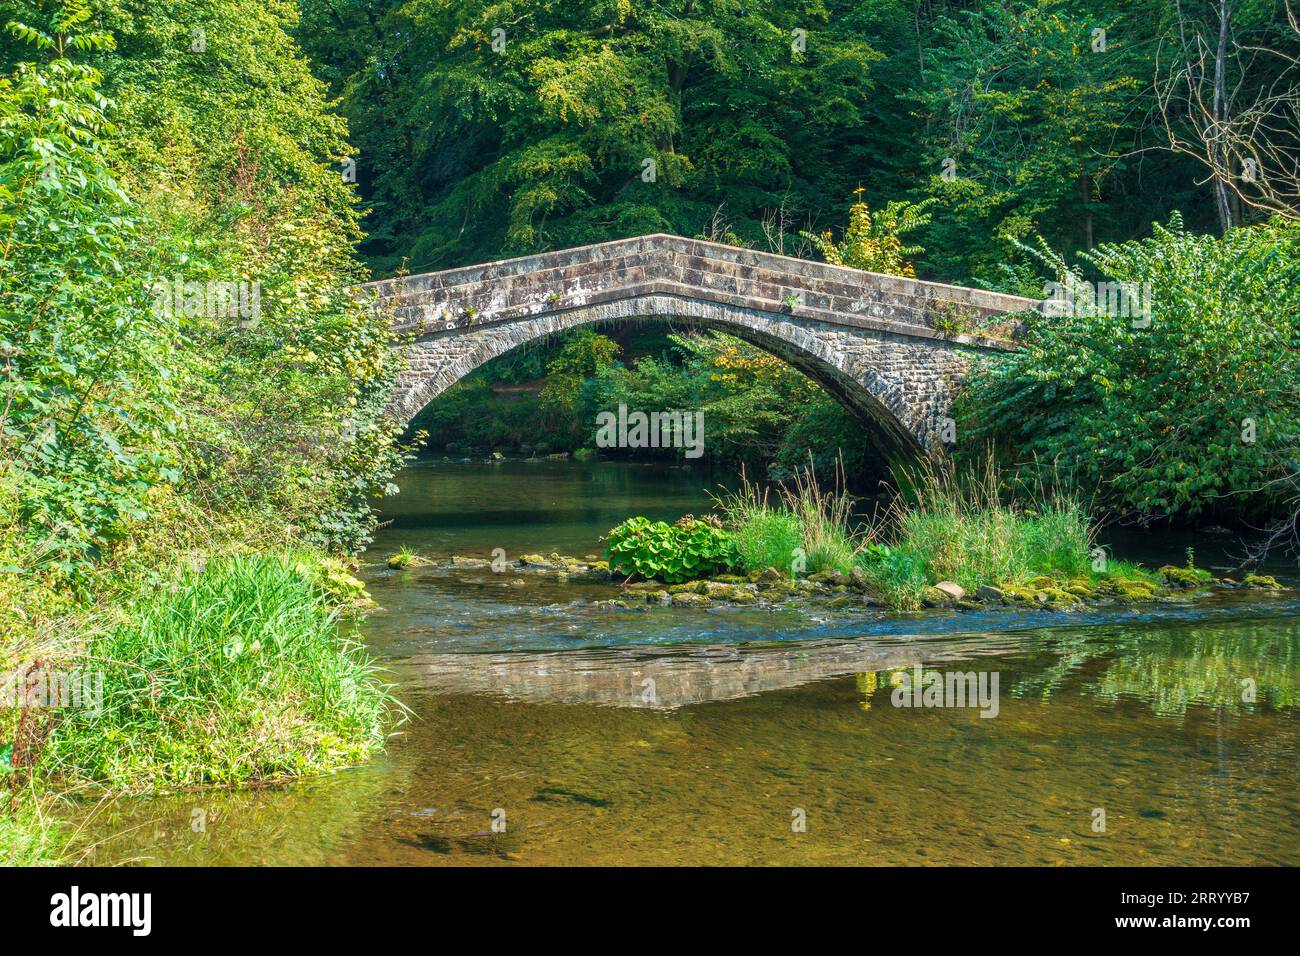 St Bertrams,Bridge,Over,the,River Manifold,Ilam Park,Staffordshire,England (Ashbourne, the 'post town', is in Derbyshire and thus so is Ilam's postal Stock Photo